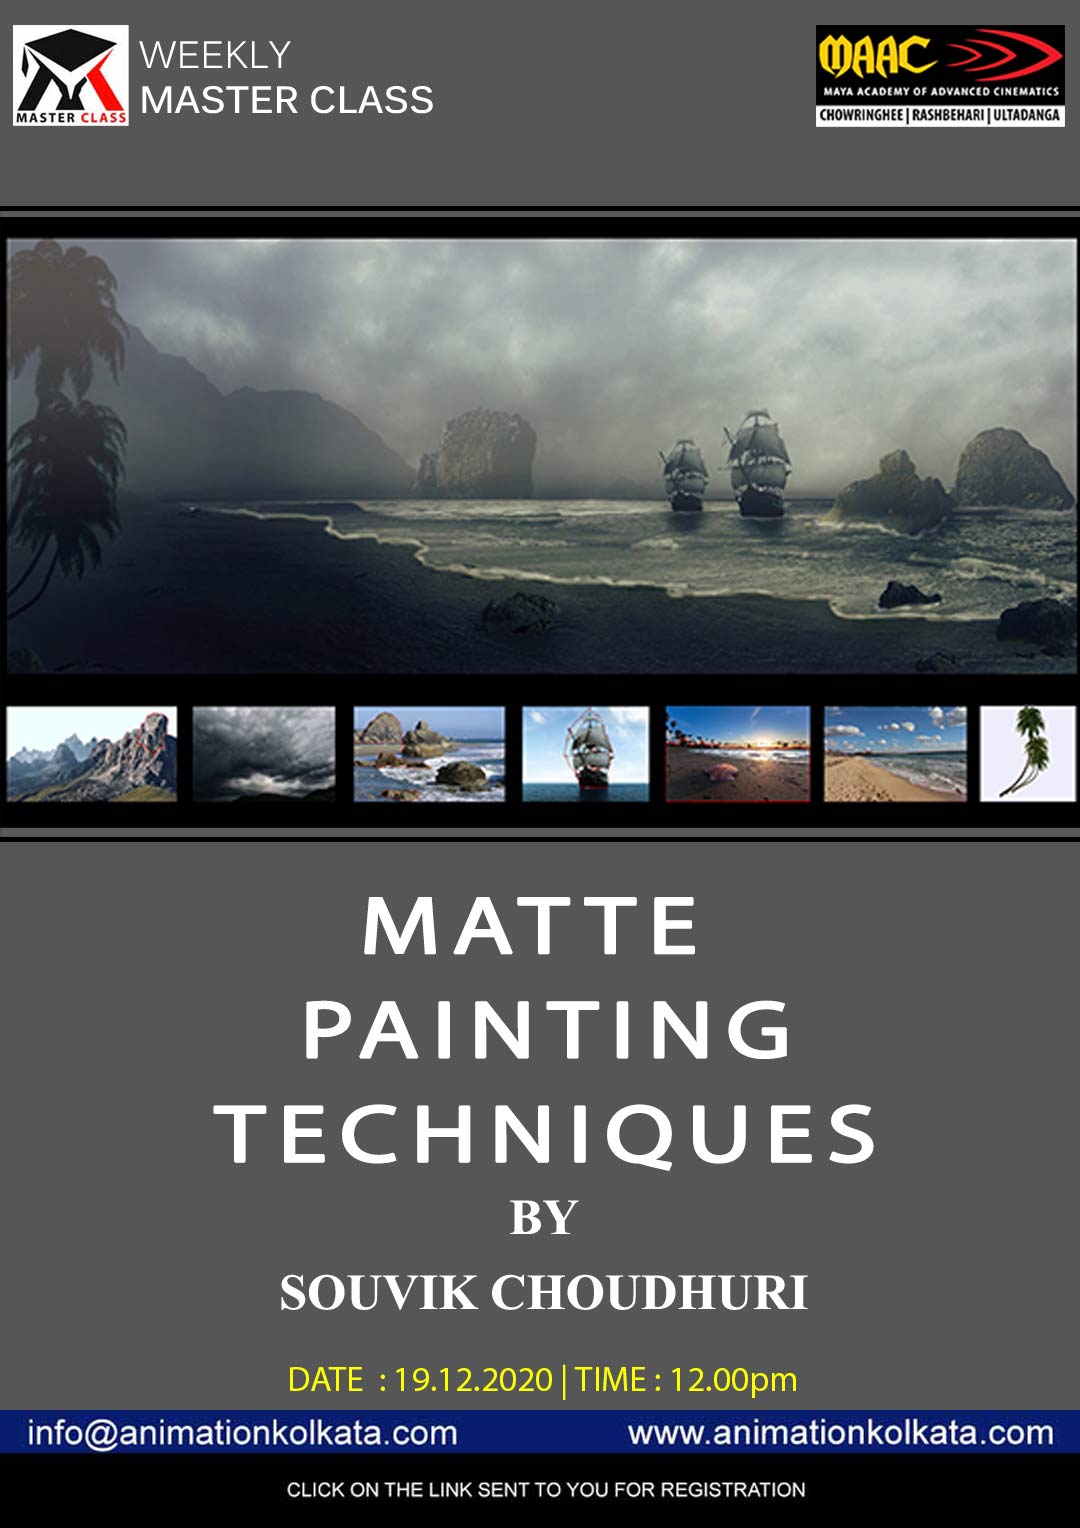 Weekly Master Class on Matte Painting Techniques